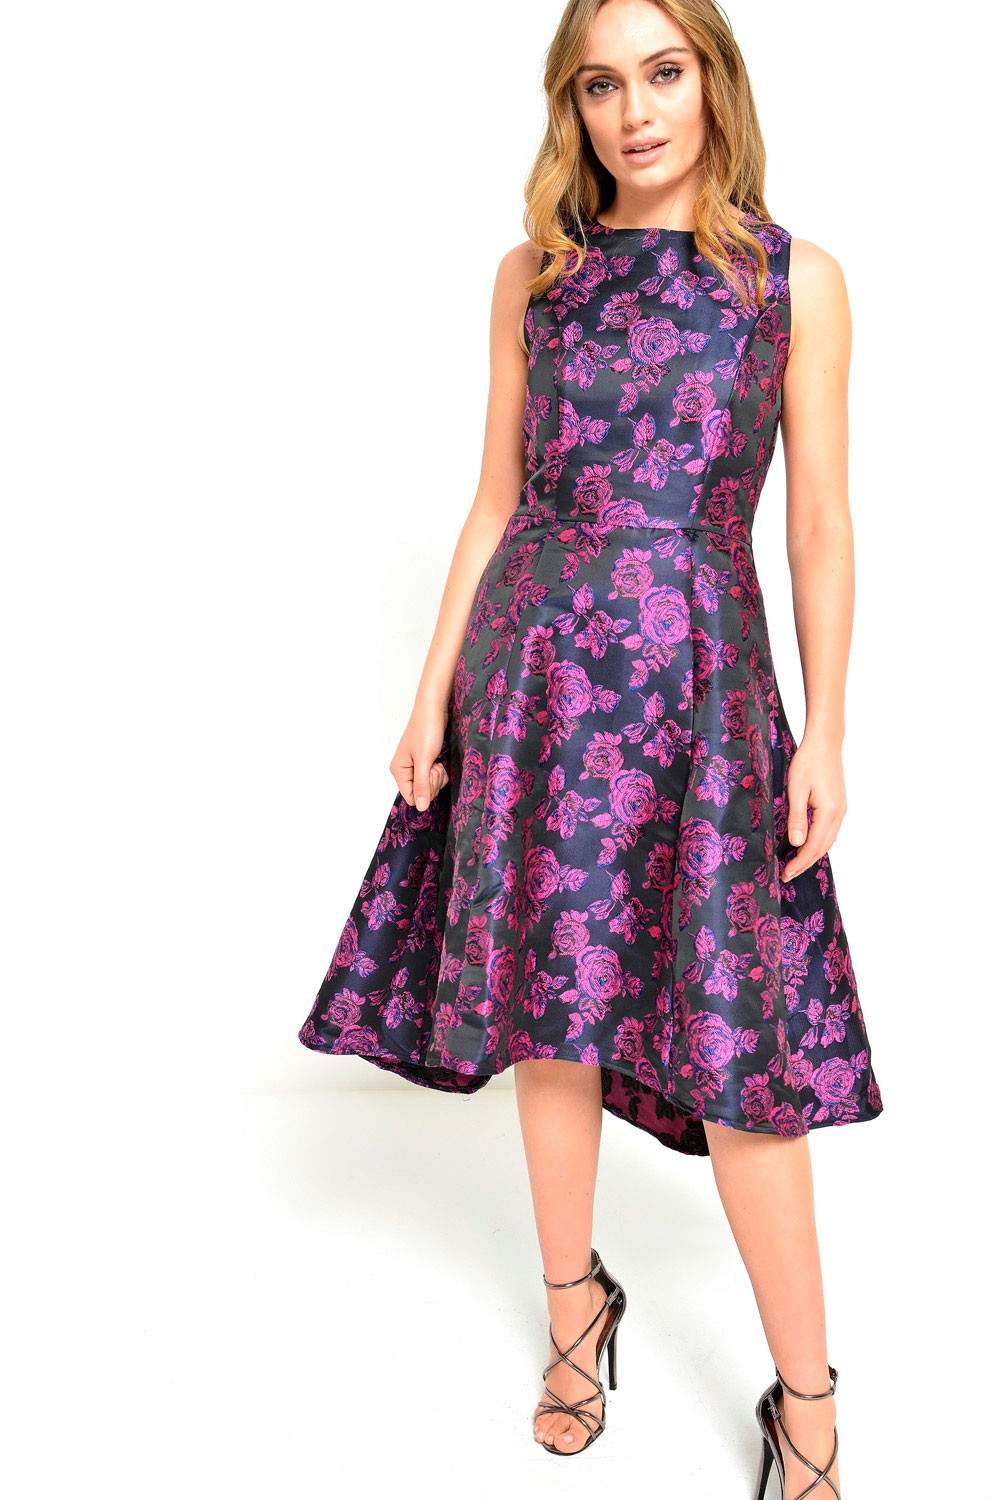 Marc Angelo Sally Brocade Dress in Pink | iCLOTHING